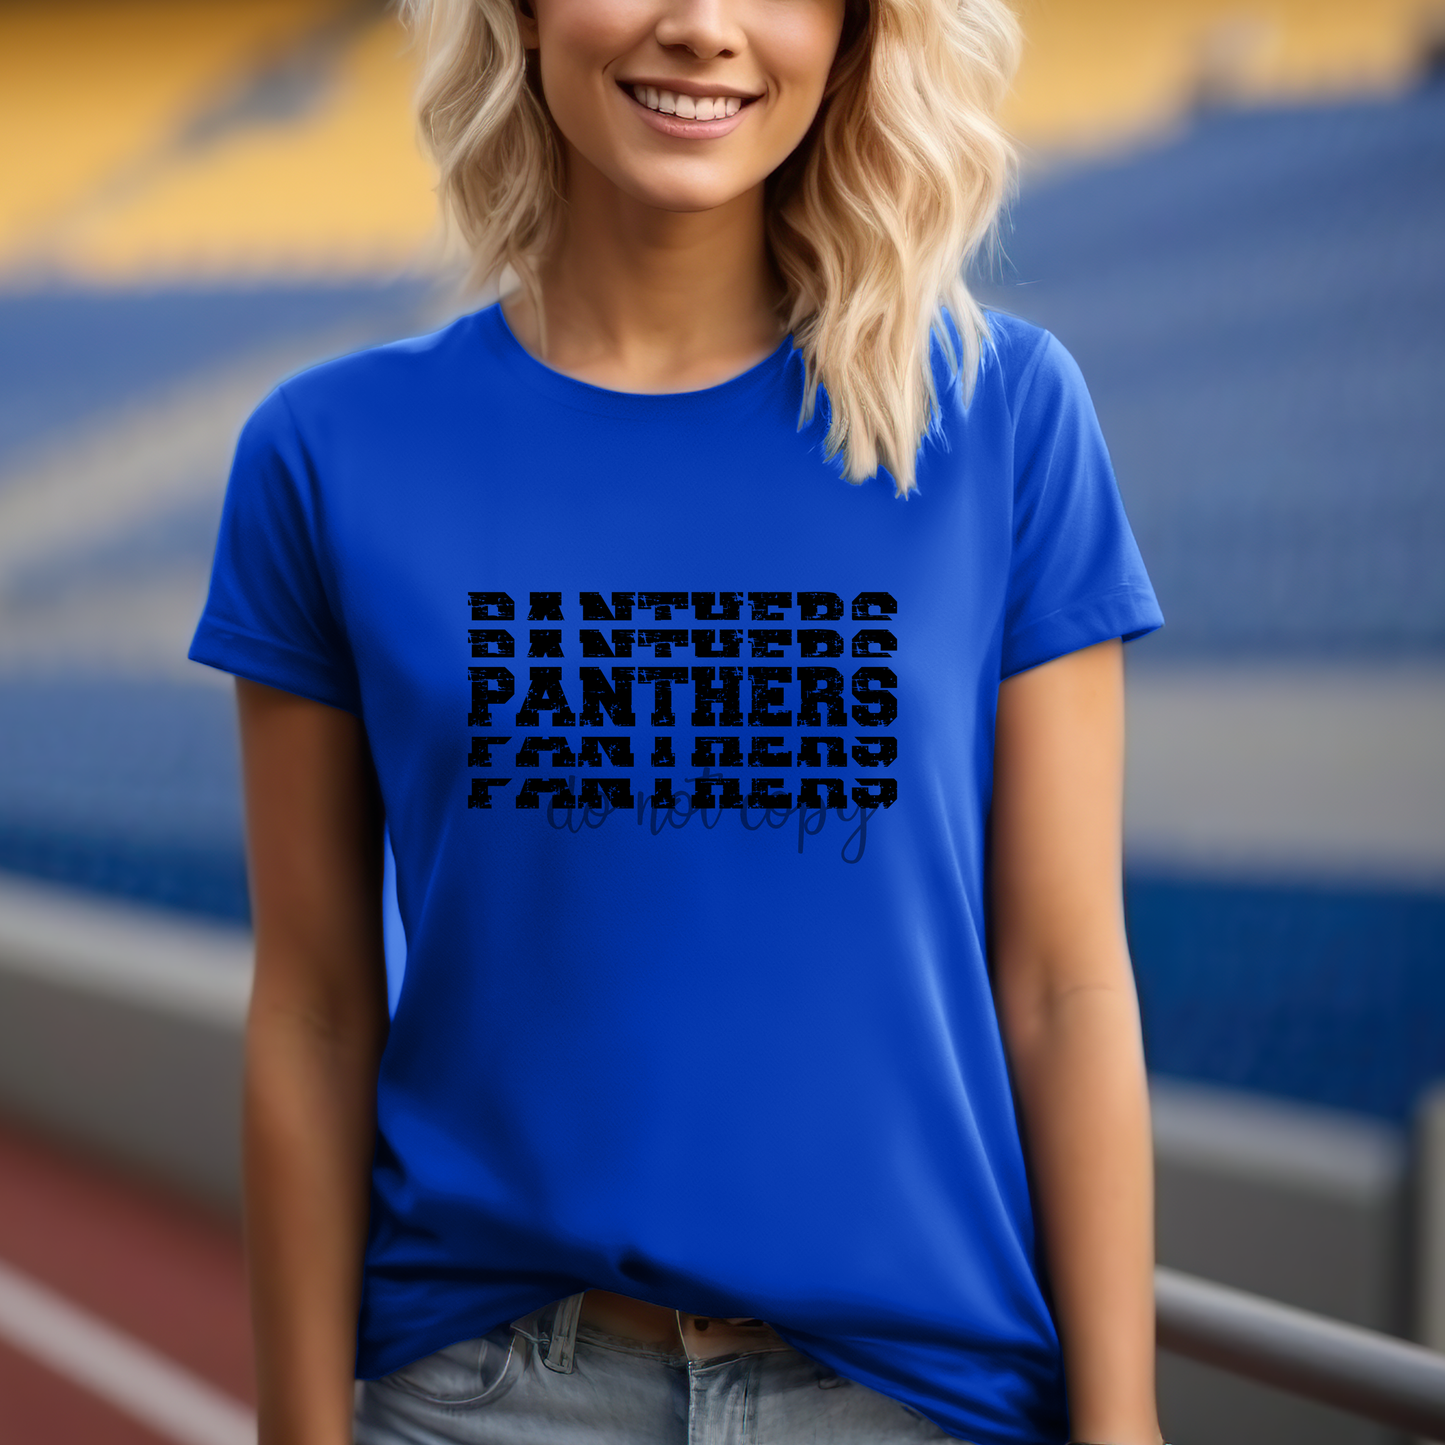 Panthers Mascot Stacked Black PNG